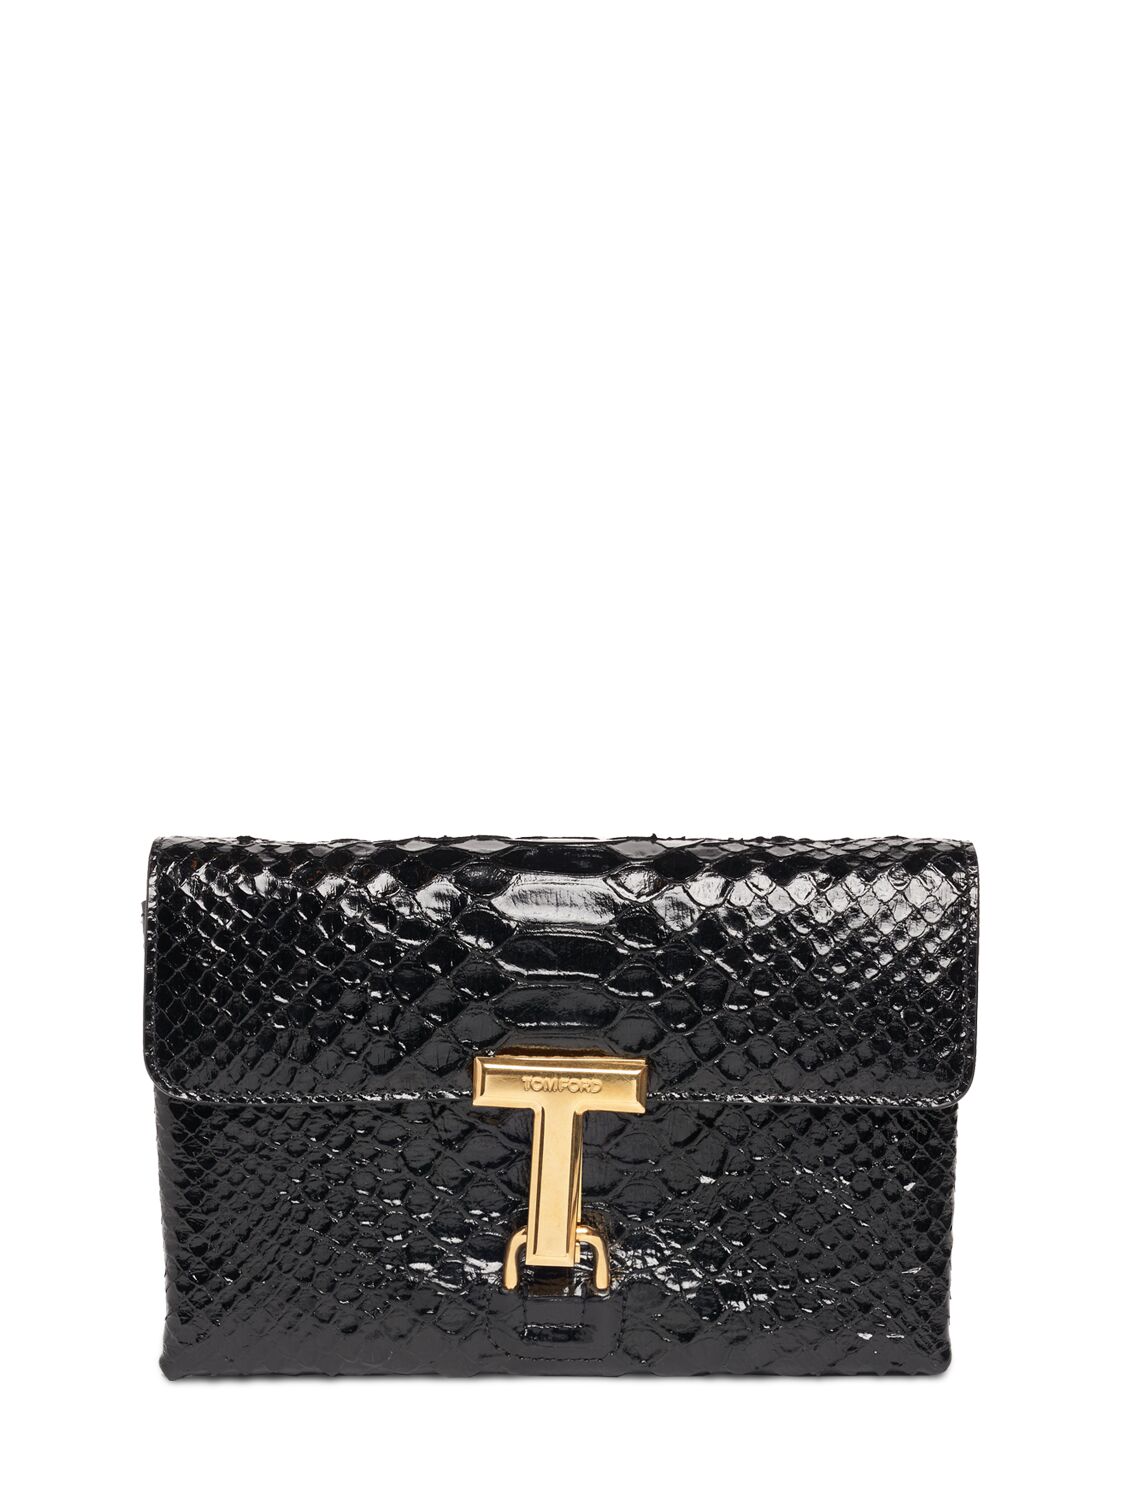 Image of Mini Glossy Snake Embossed Leather Bag